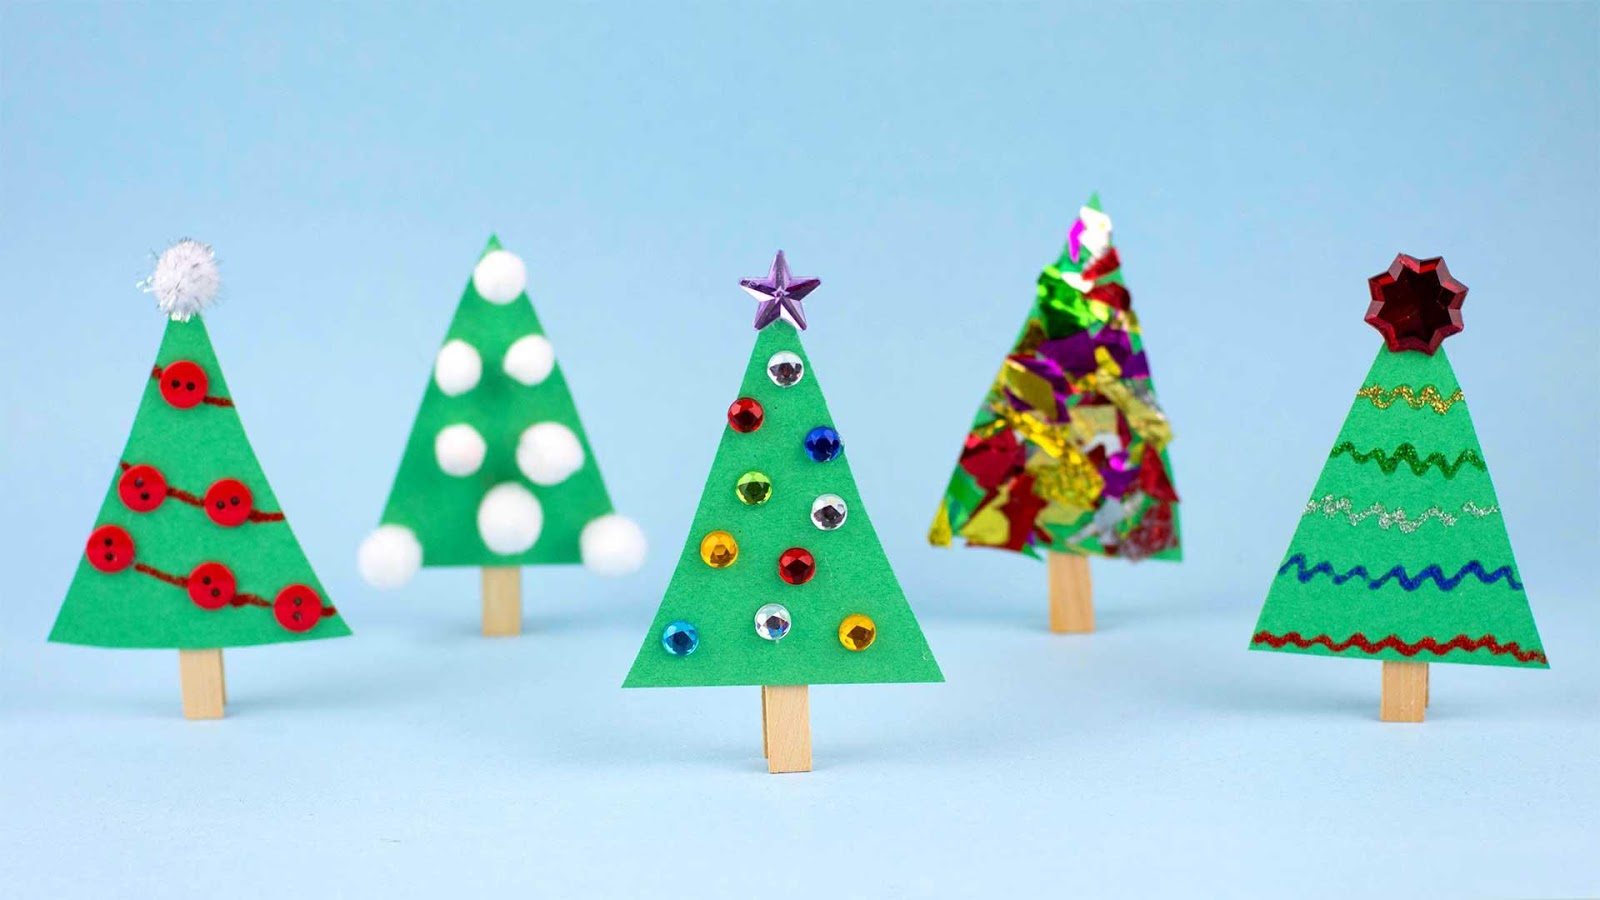 Five Christmas trees made from popsicle sticks.